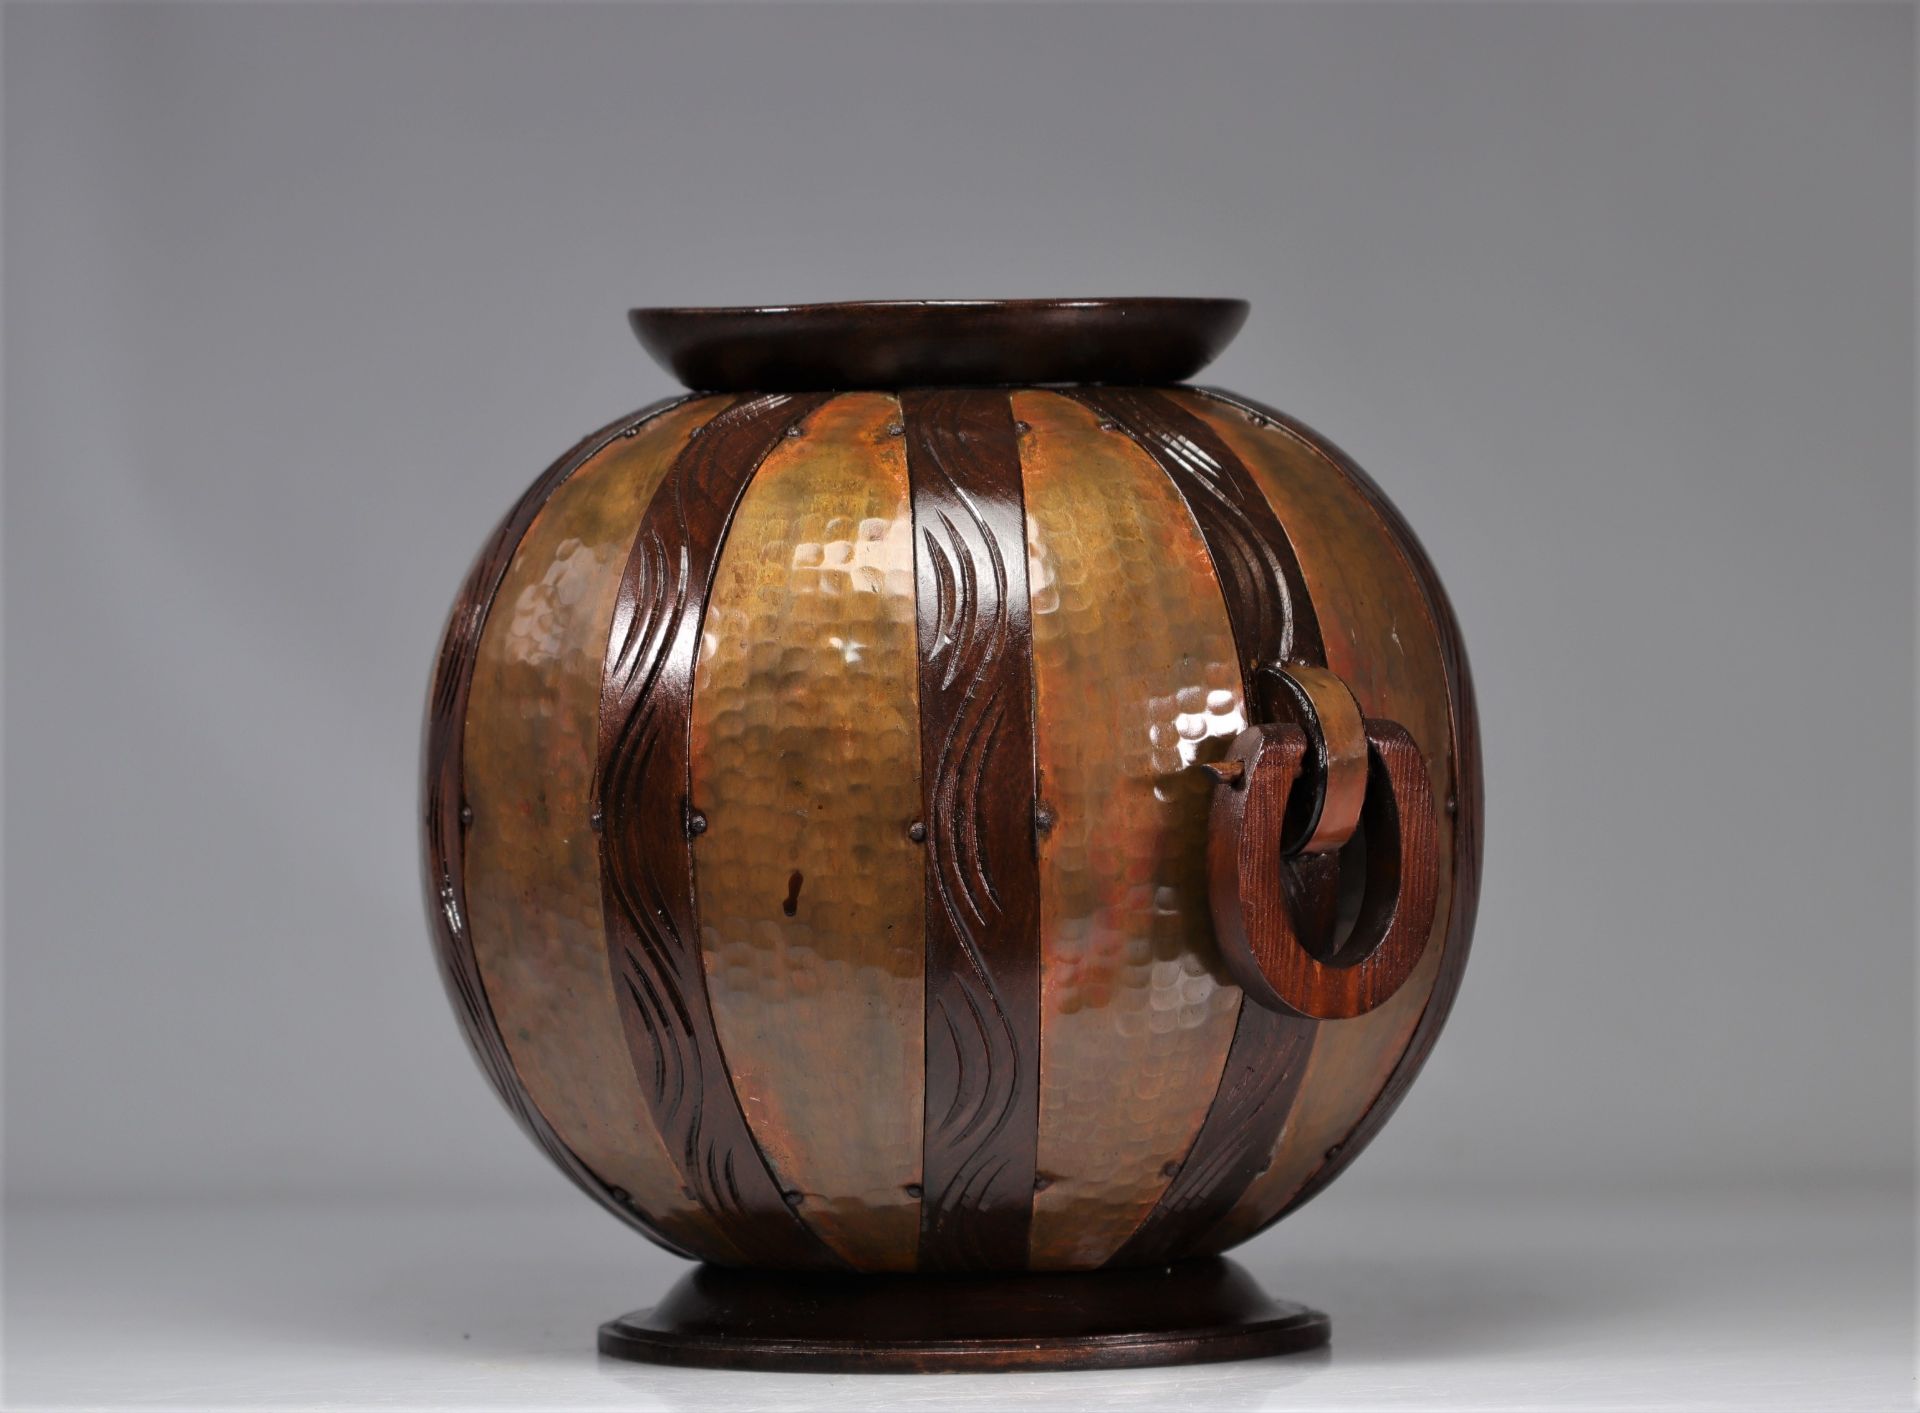 Gustave SERRURIER-BOVY (1858-1910) Hammered copper and wood ball vase - Image 2 of 3